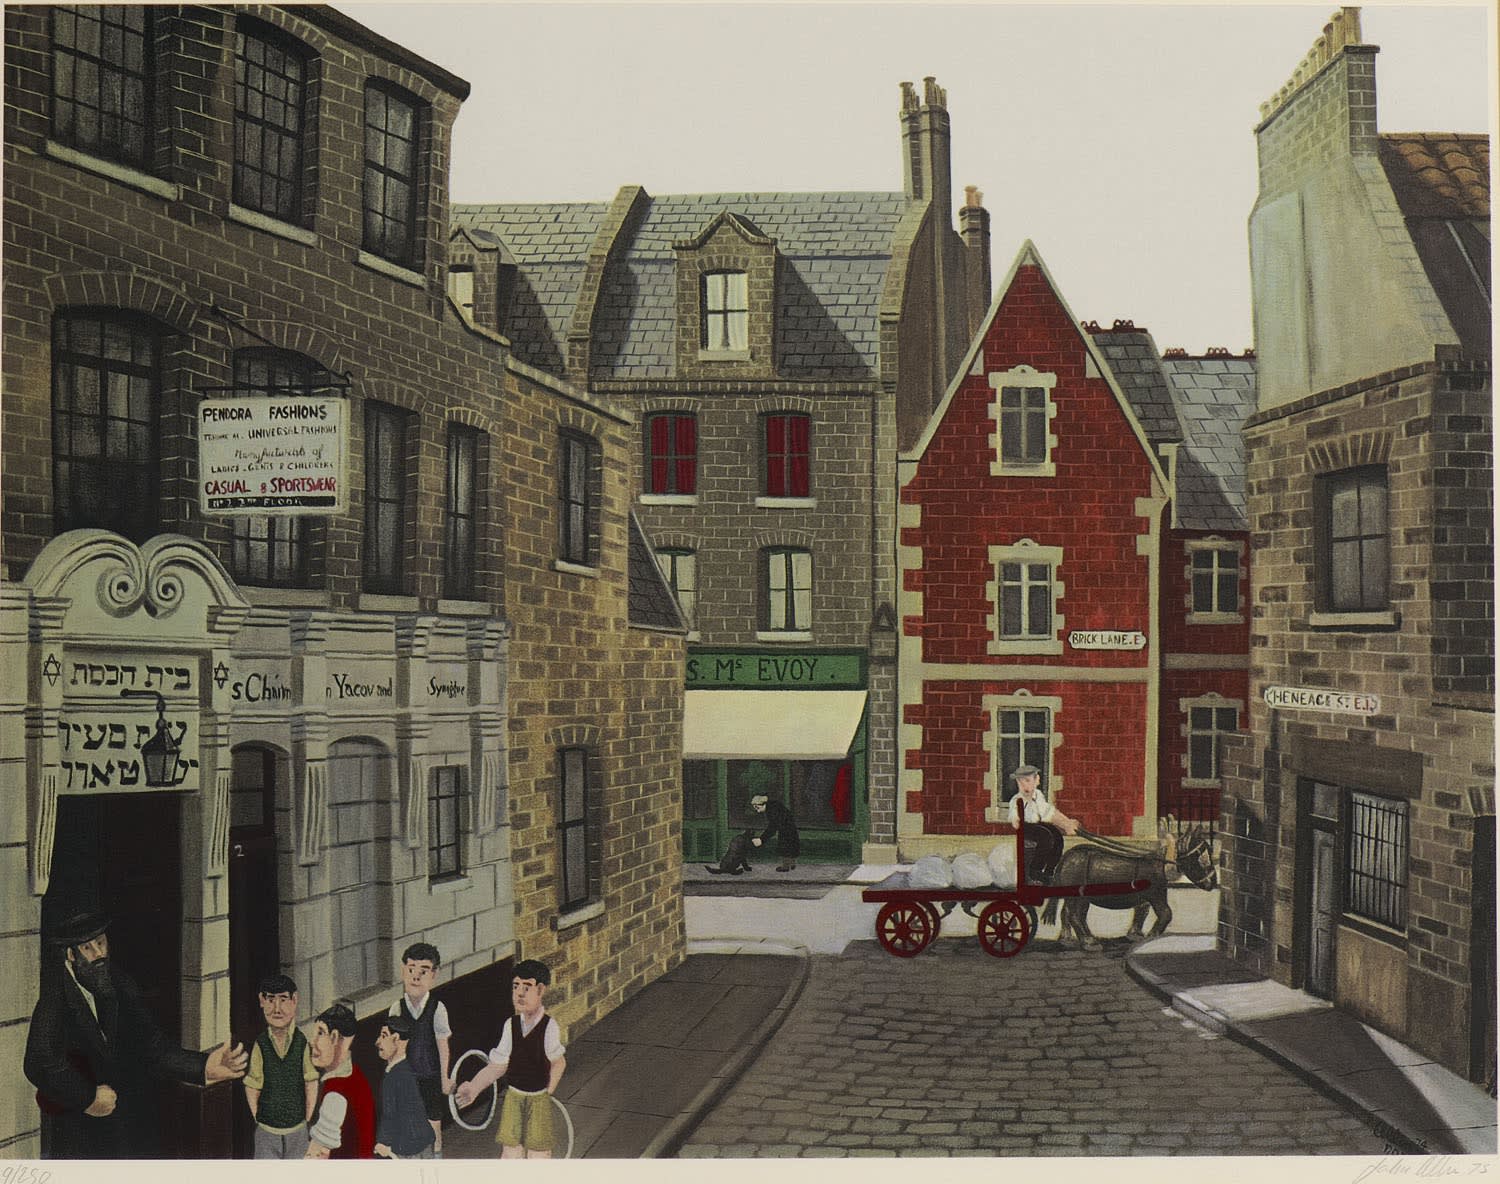 John Allin (1934-1991) Brick Lane and Heneage Street, East End Series c.1974-75 Print on paper 46.2 x 49 cm Ben Uri Collection © John Allin estate To see and discover more about this artist click here